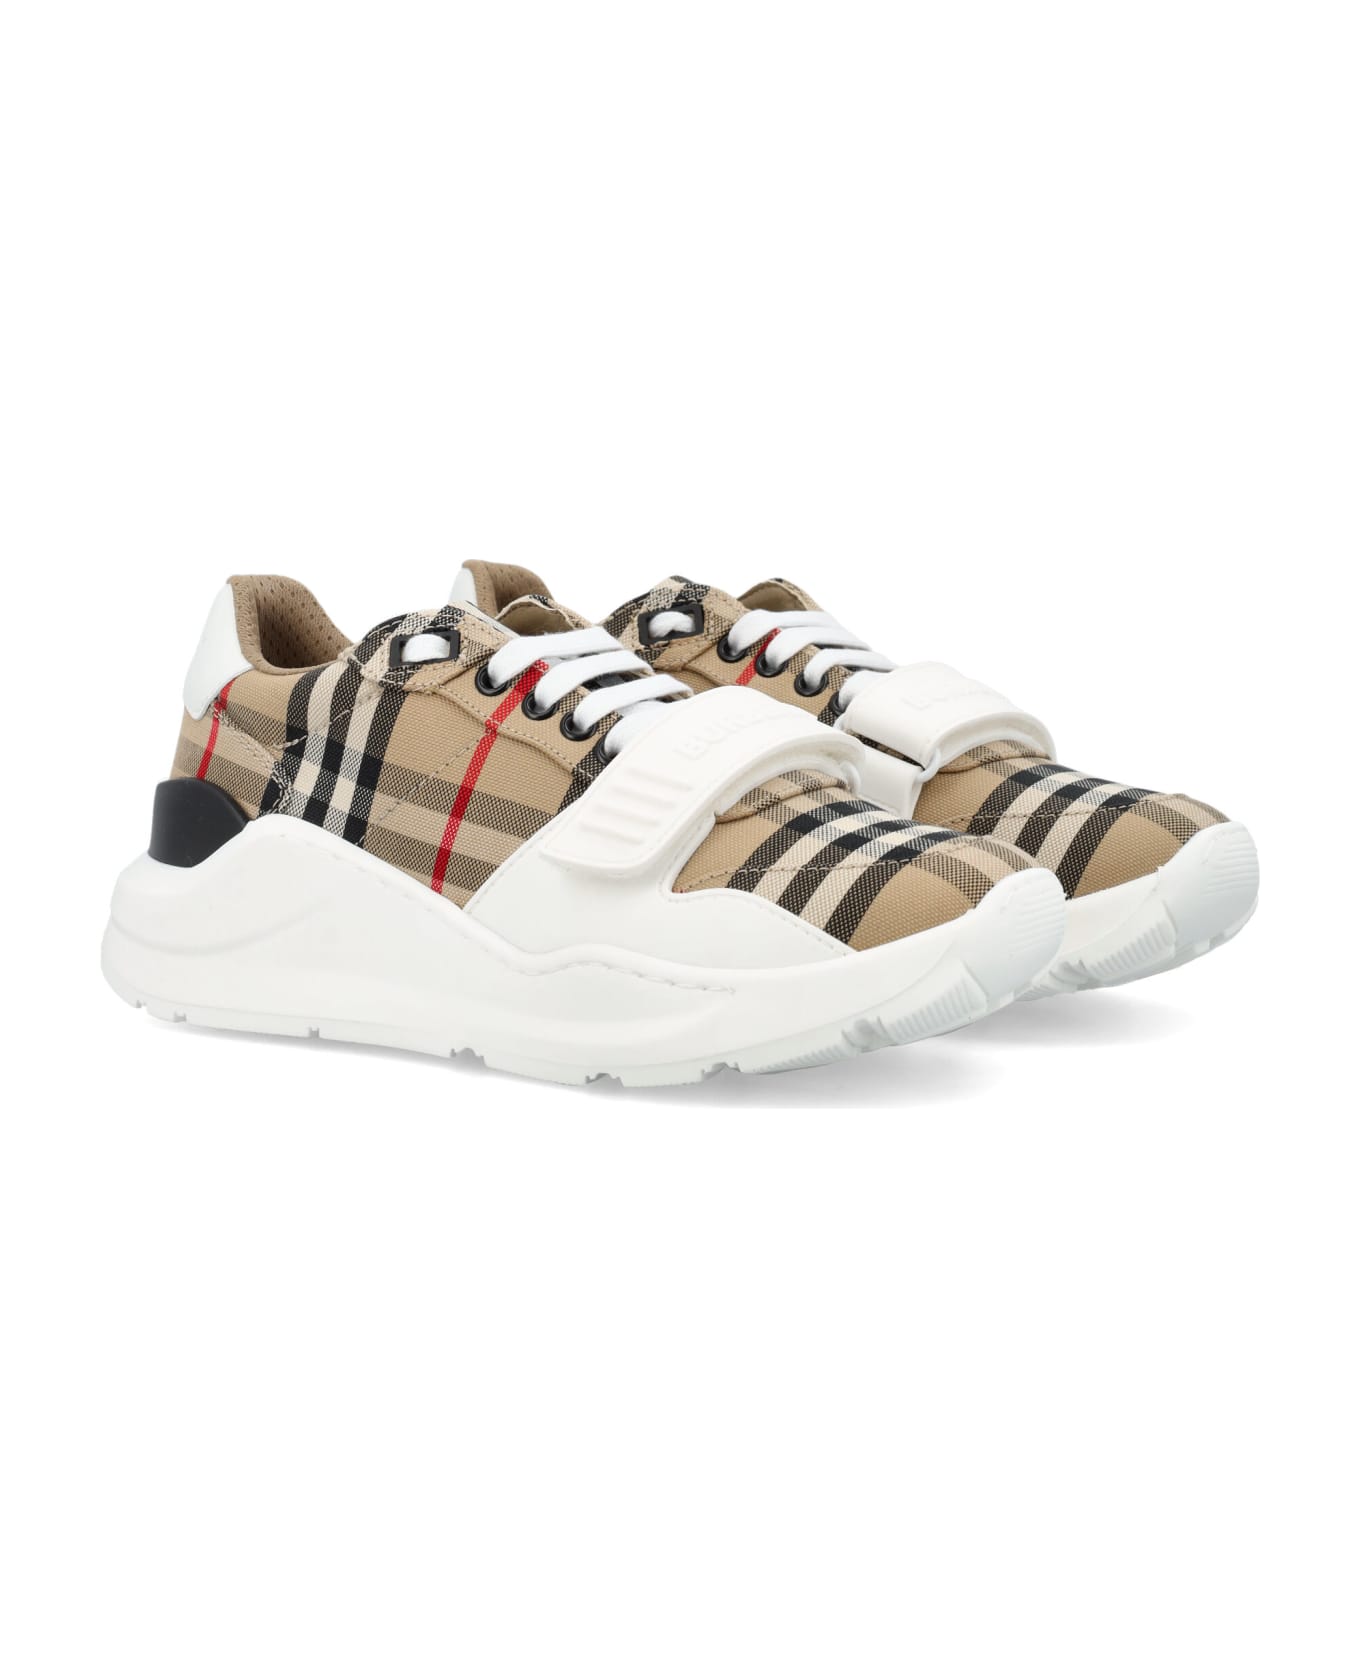 Burberry London Check Woman's Sneakers - ARCHIVE BEIGE IP CHK